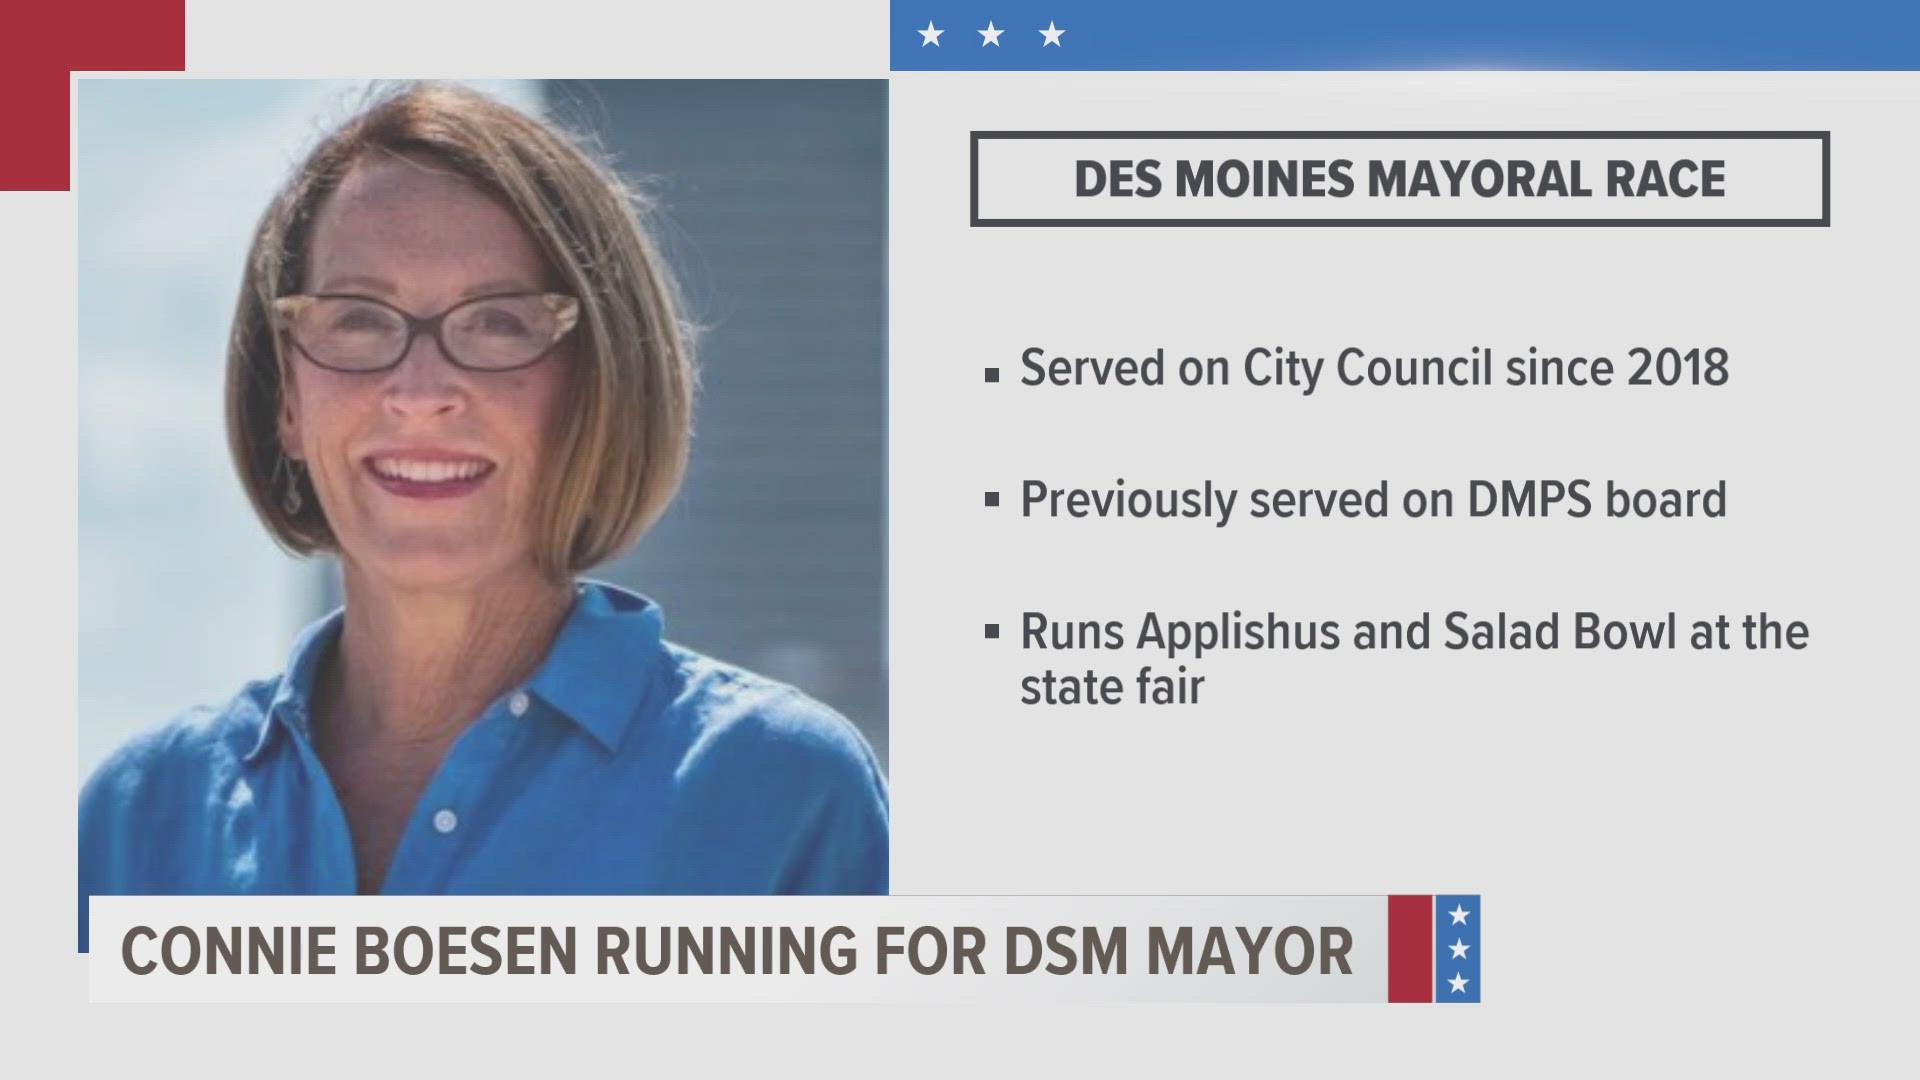 Boesen has served on the city council since 2018. Before that, she was a member of the Des Moines Public Schools board.